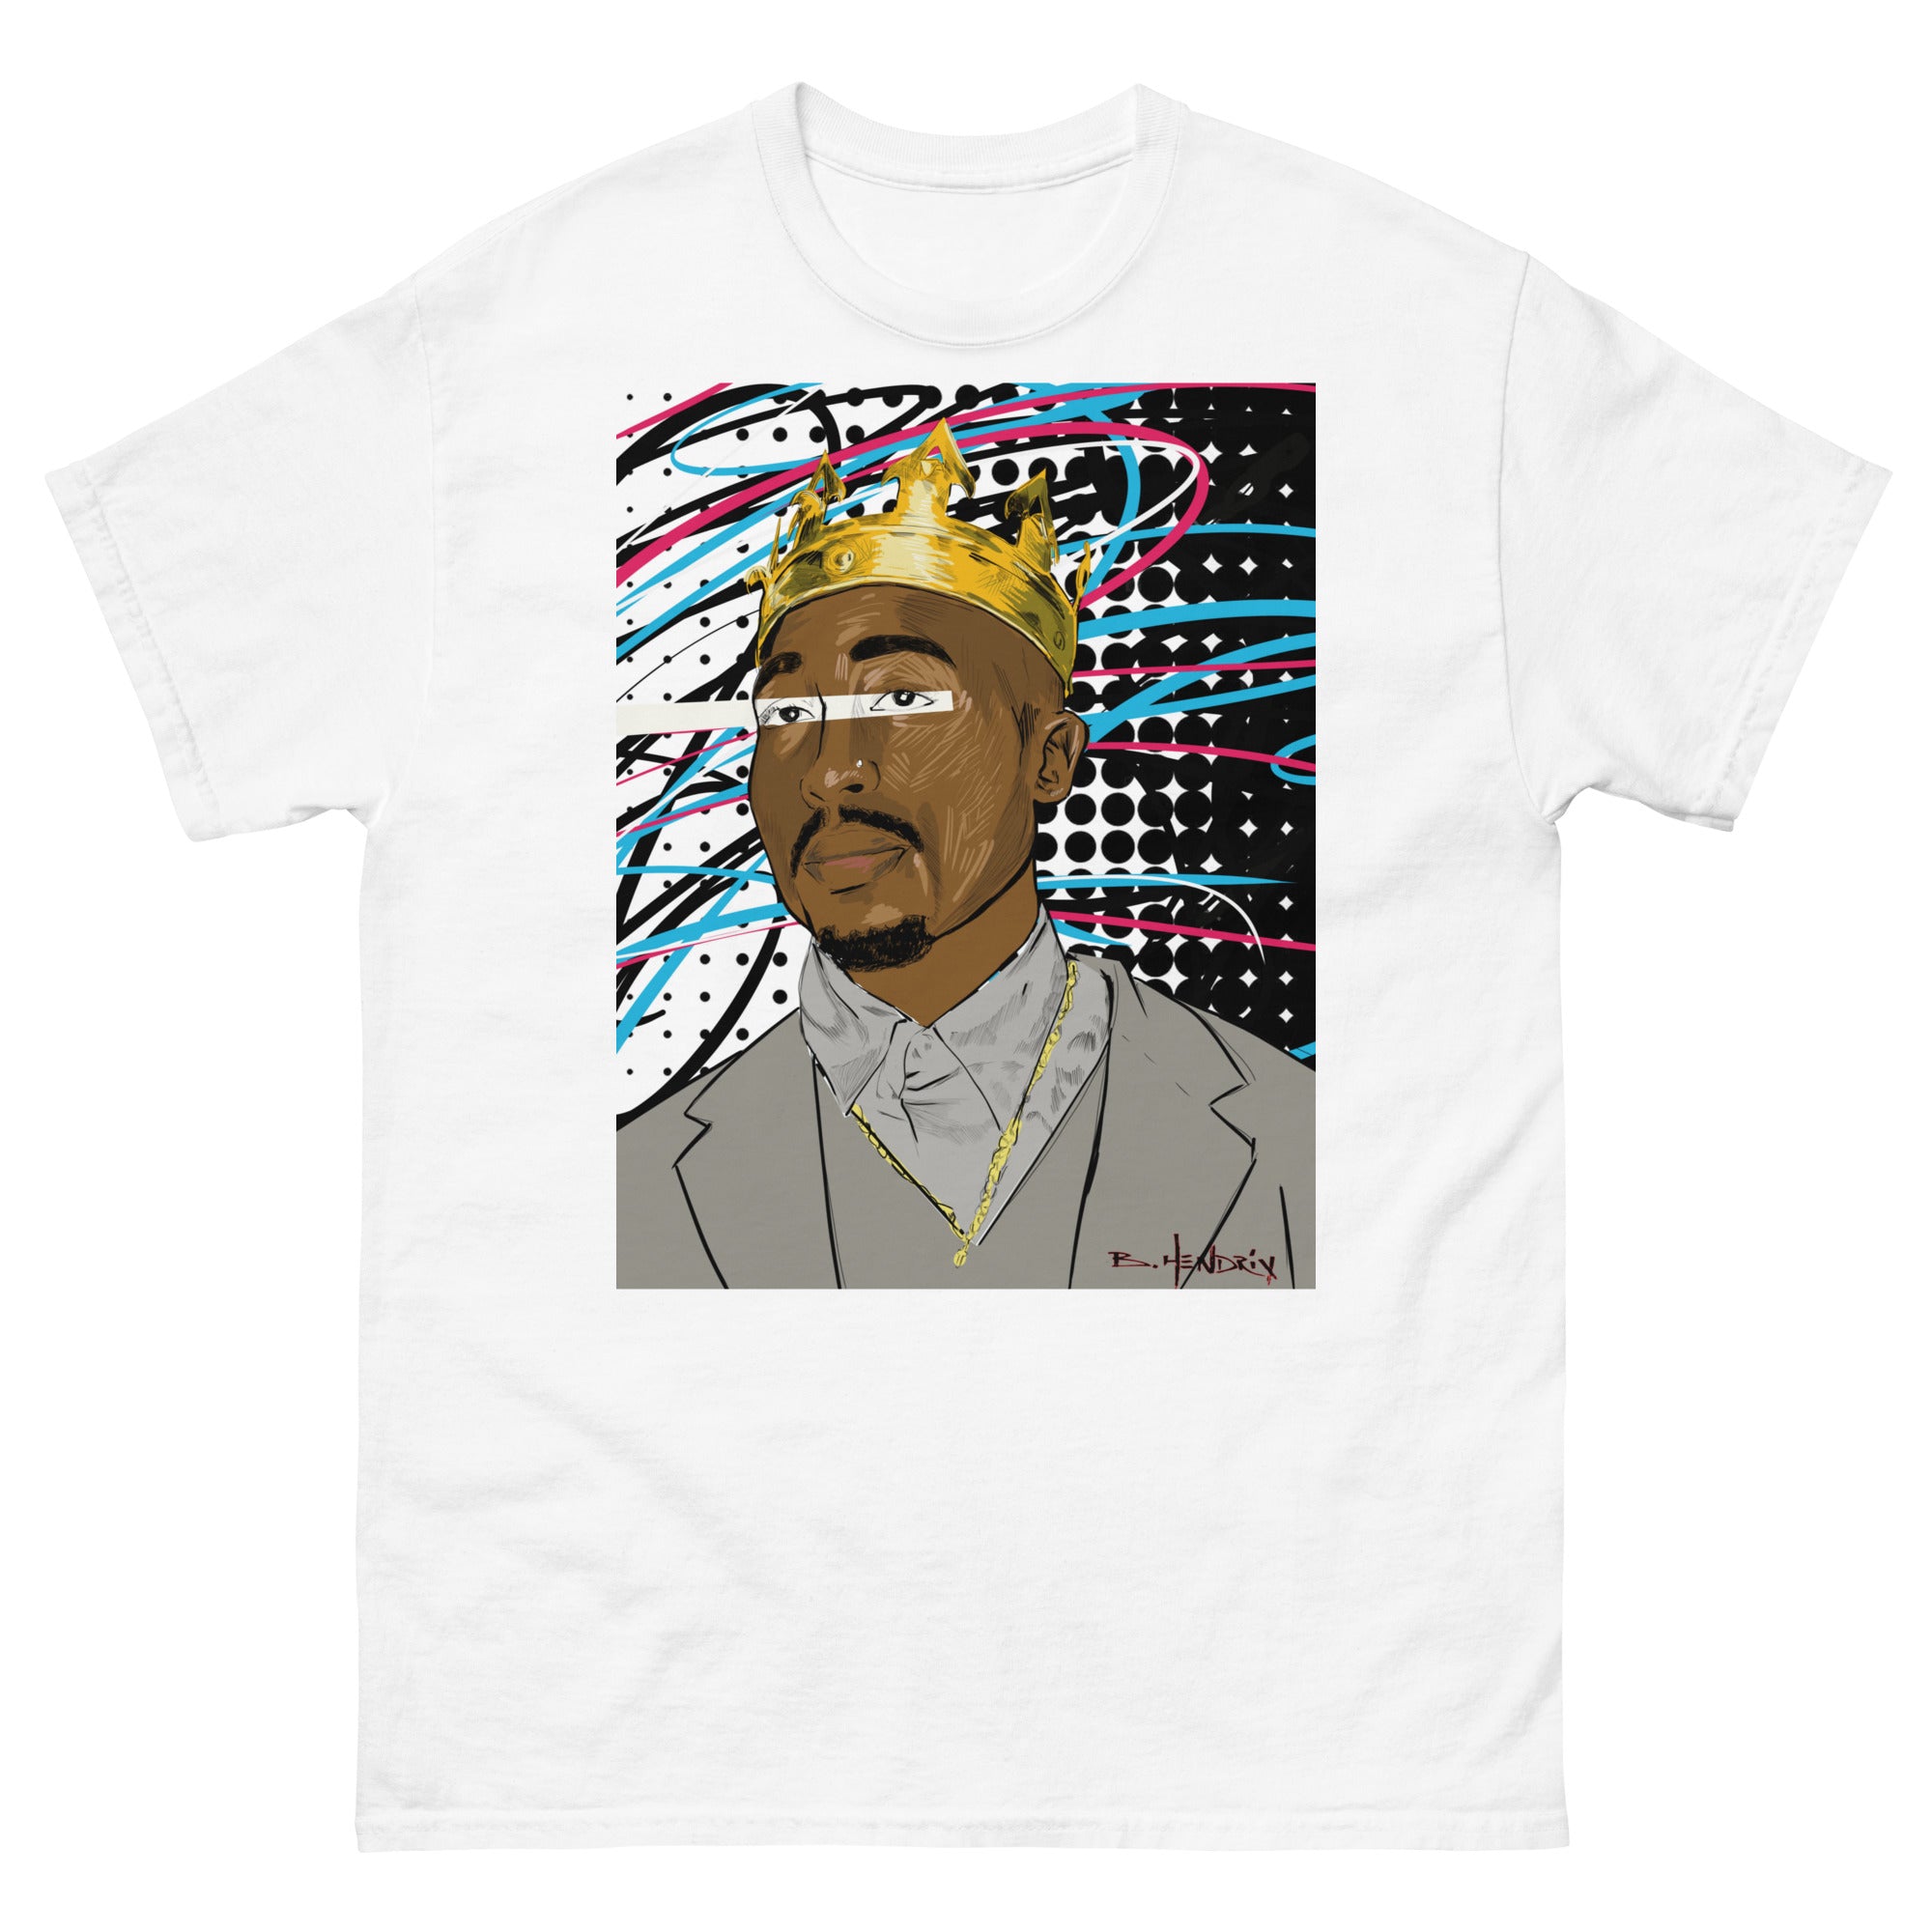 All Eyes on Me 2 Pac Men's classic tee